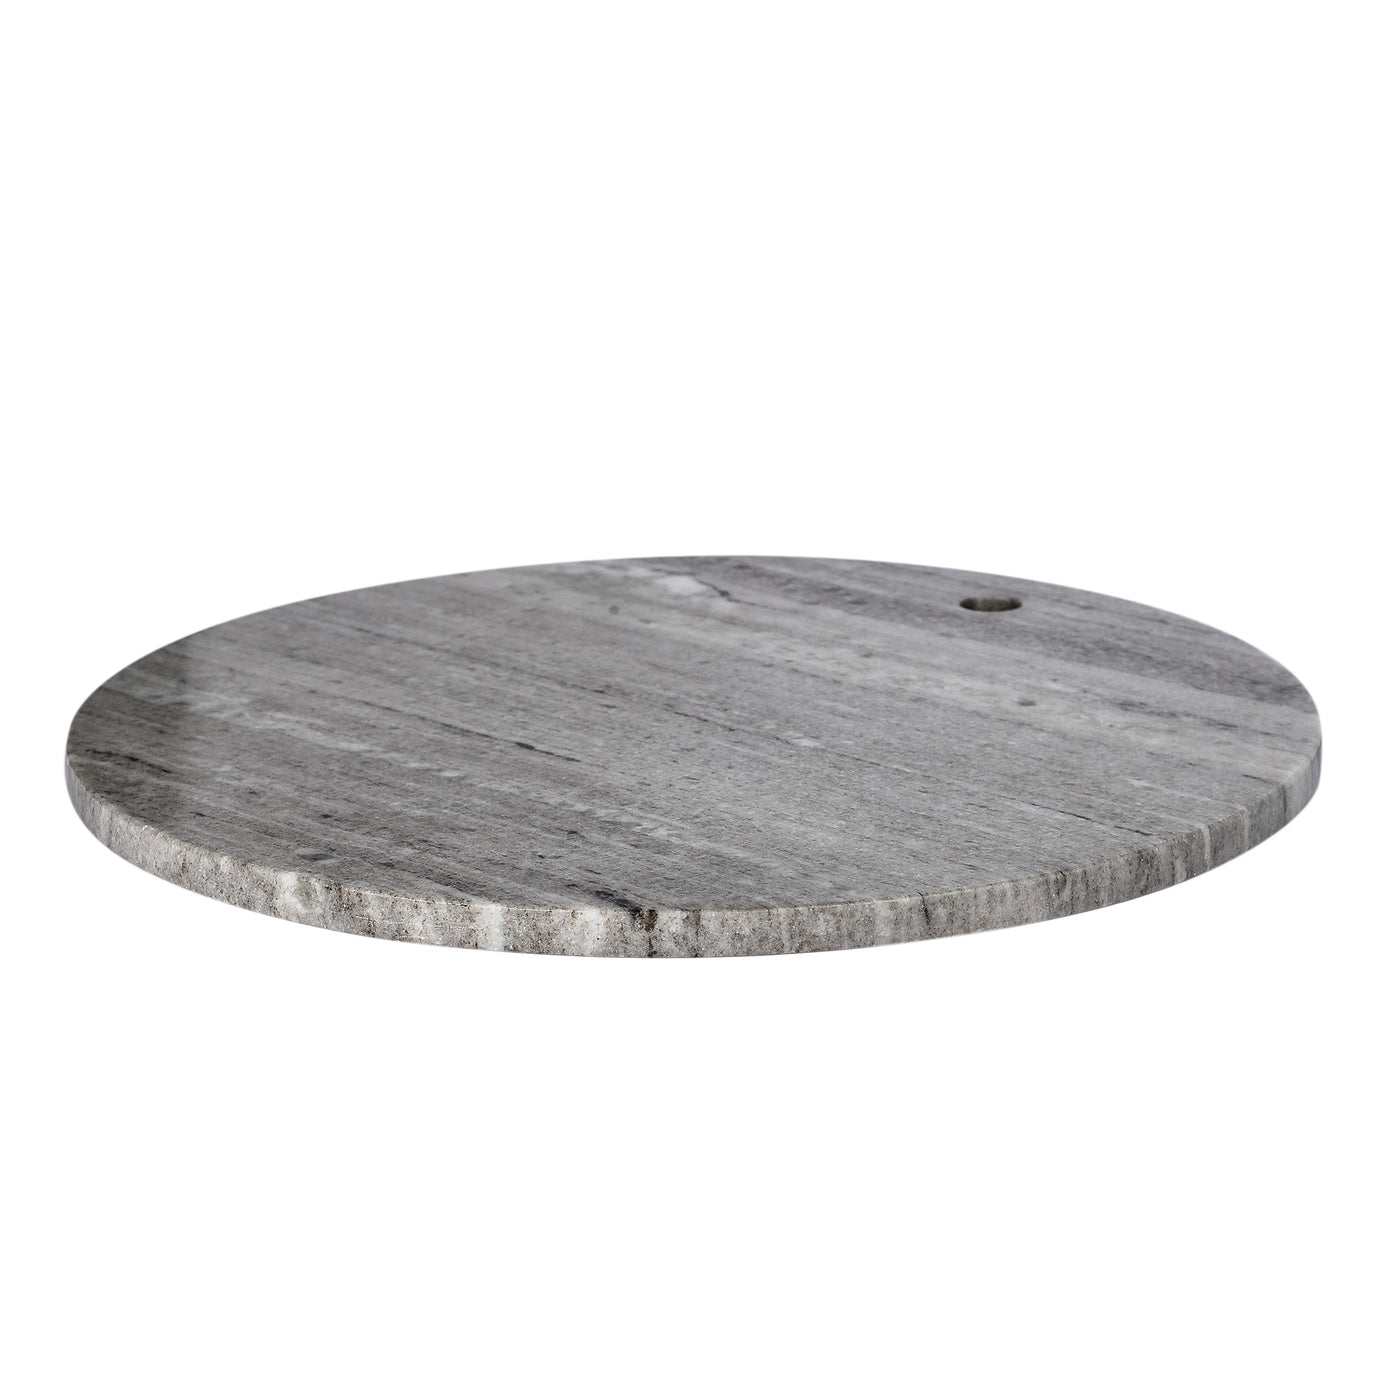 Marbluxe Circular Chopping and Serving Board